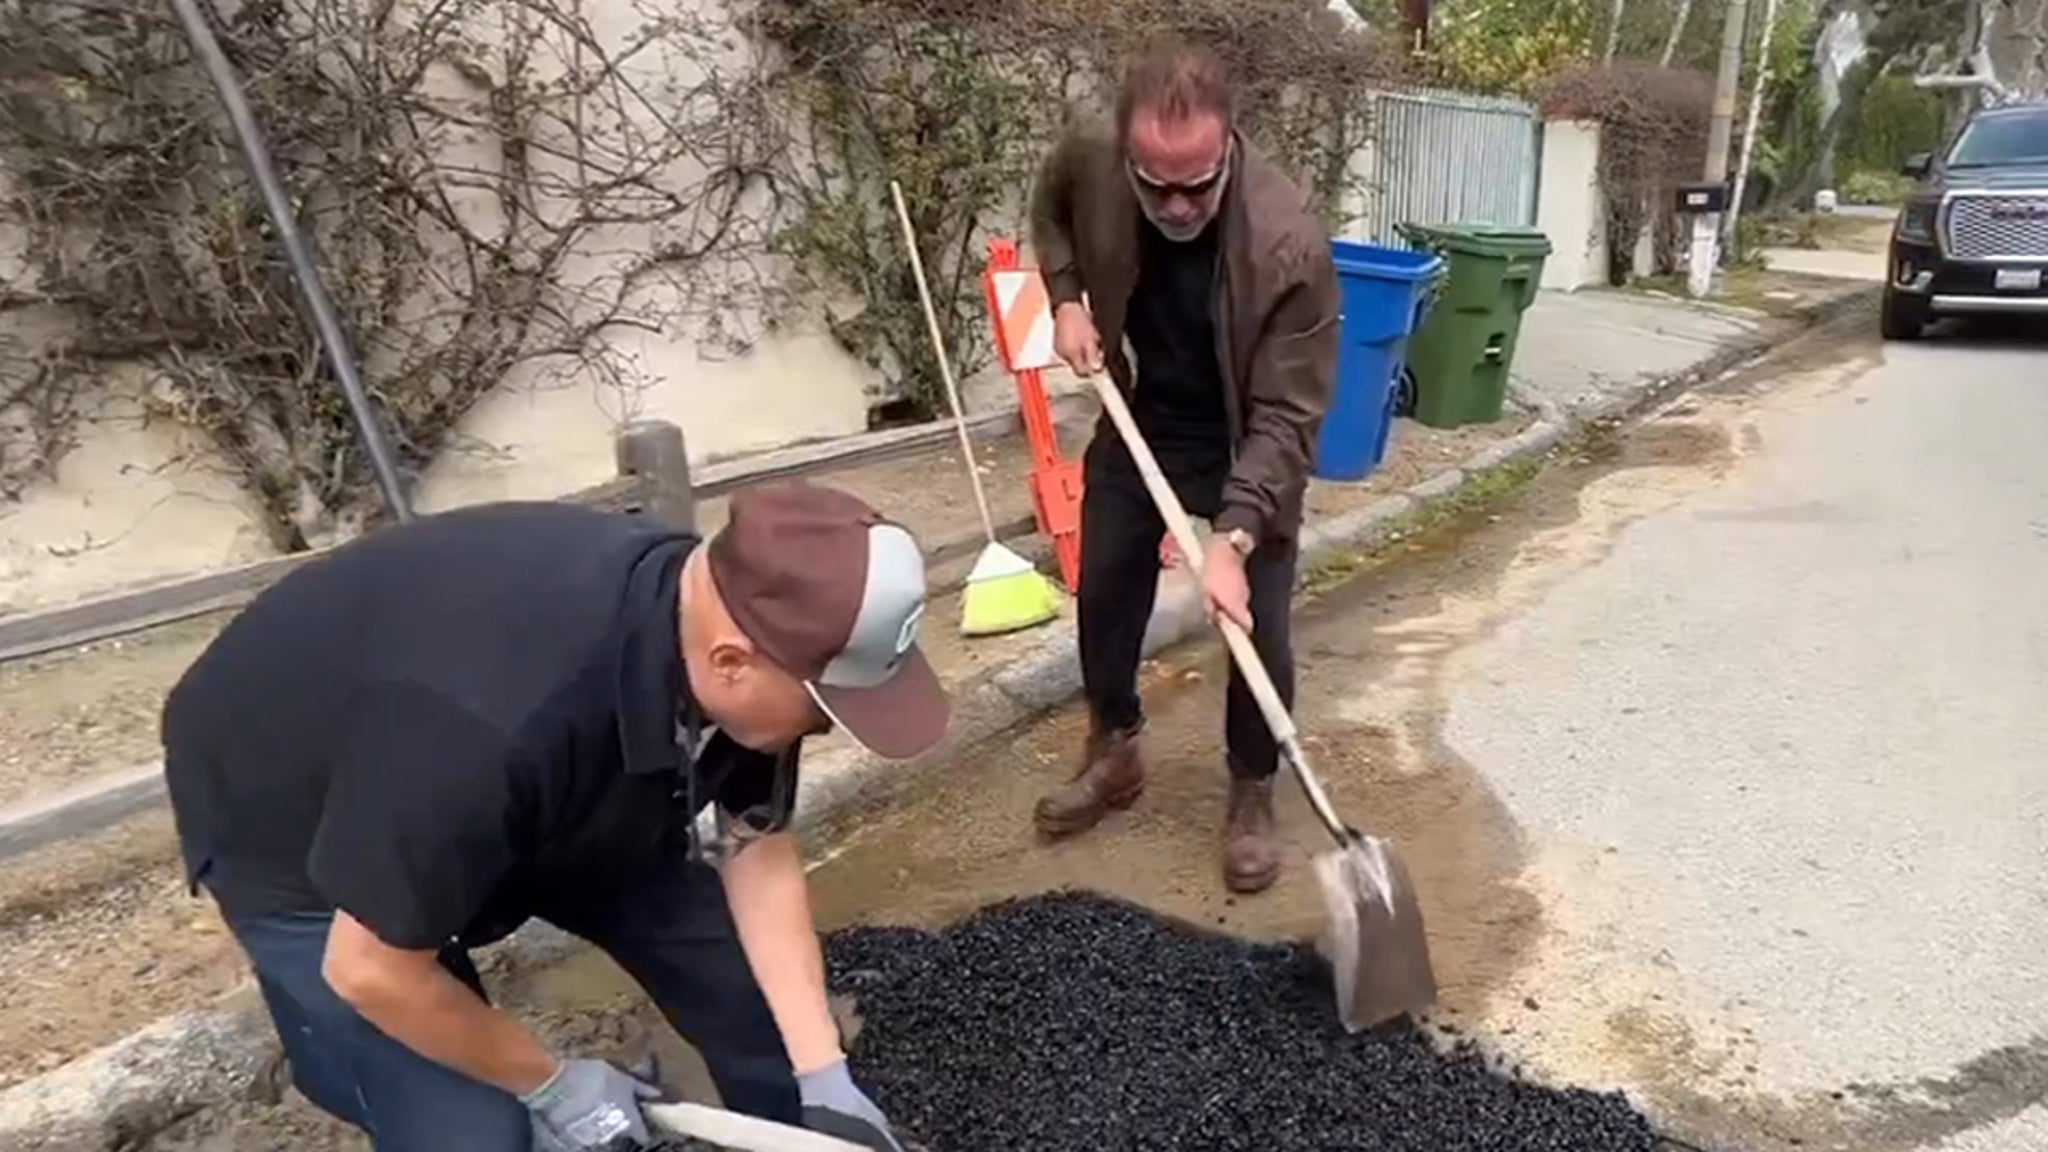 Arnold Schwarzenegger Pothole Was Service Trench, But Work Was Long Done